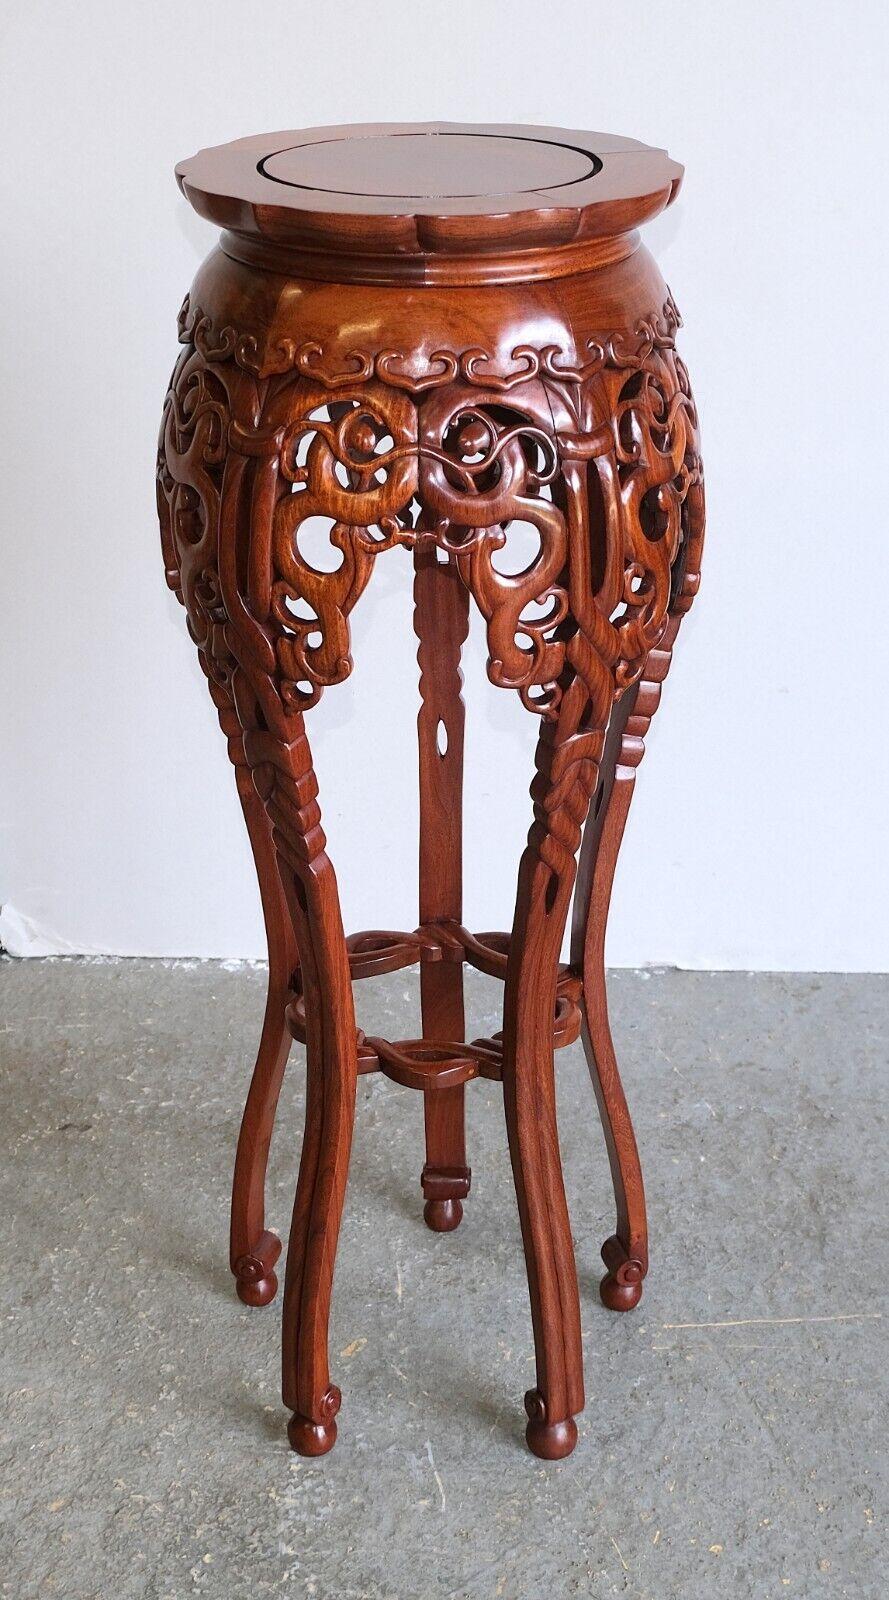 We are delighted to offer for sale this gorgeous Chinese hand carved teak plant stand, petal shaped top and stunning legs.

This beautiful piece shows hand-carved motif decorations all around, which stand proudly in any room. The legs have soft nice